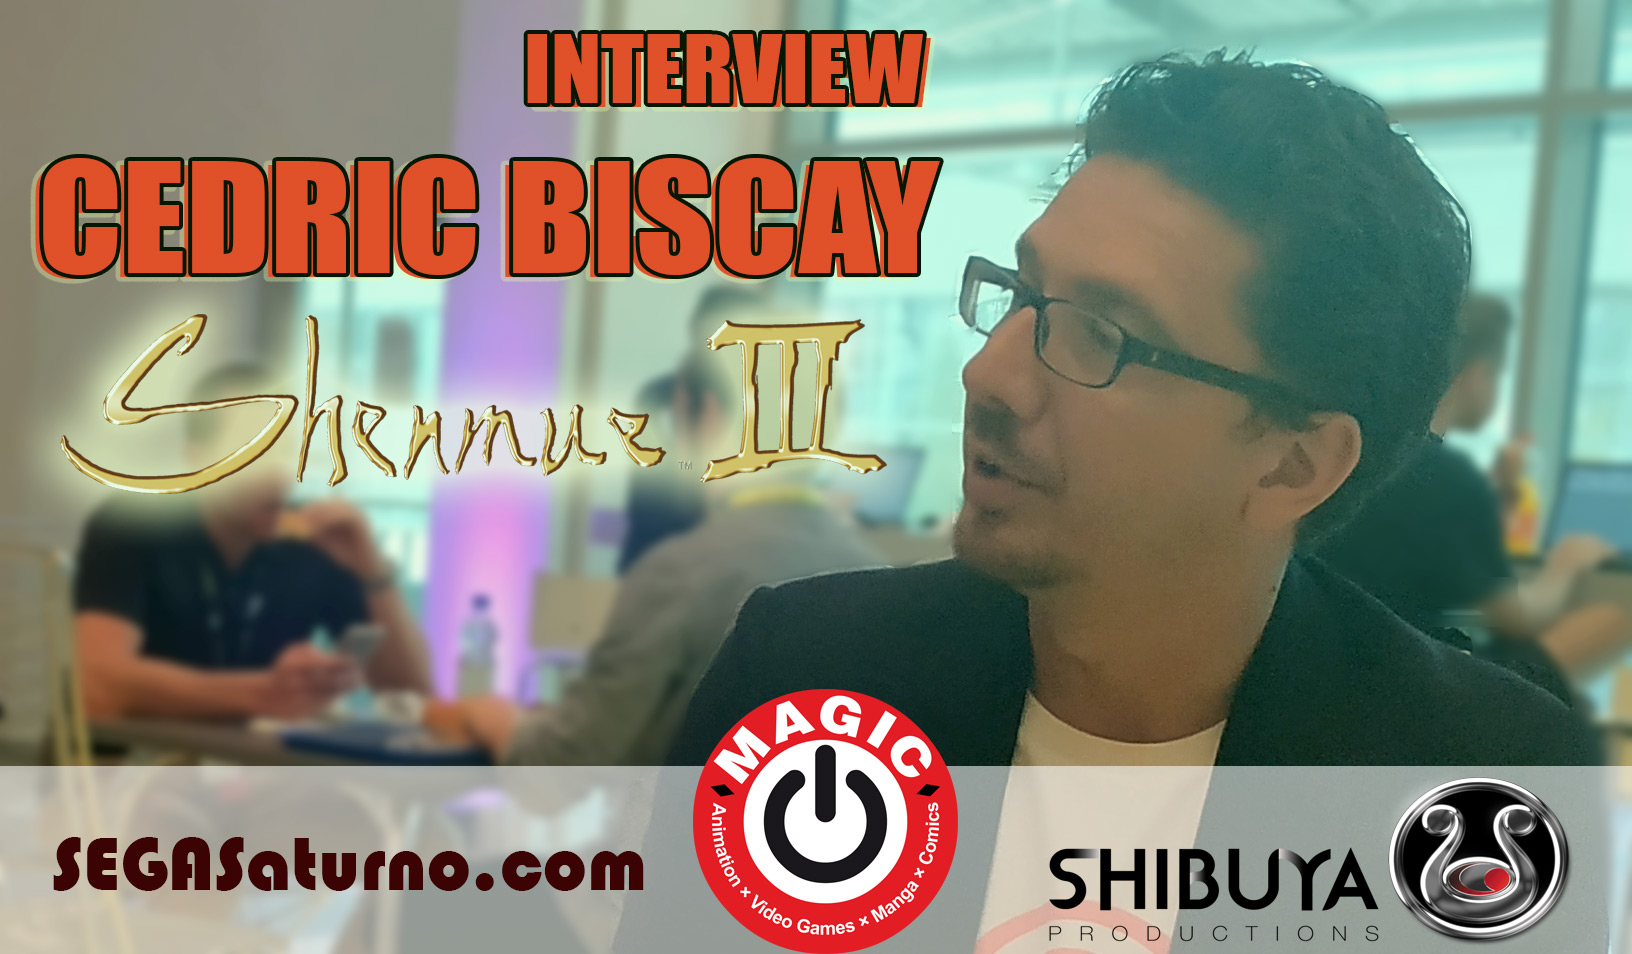 cedric biscay shibuya productions shenmue iii 3 gamescom 2018 entrevista interview